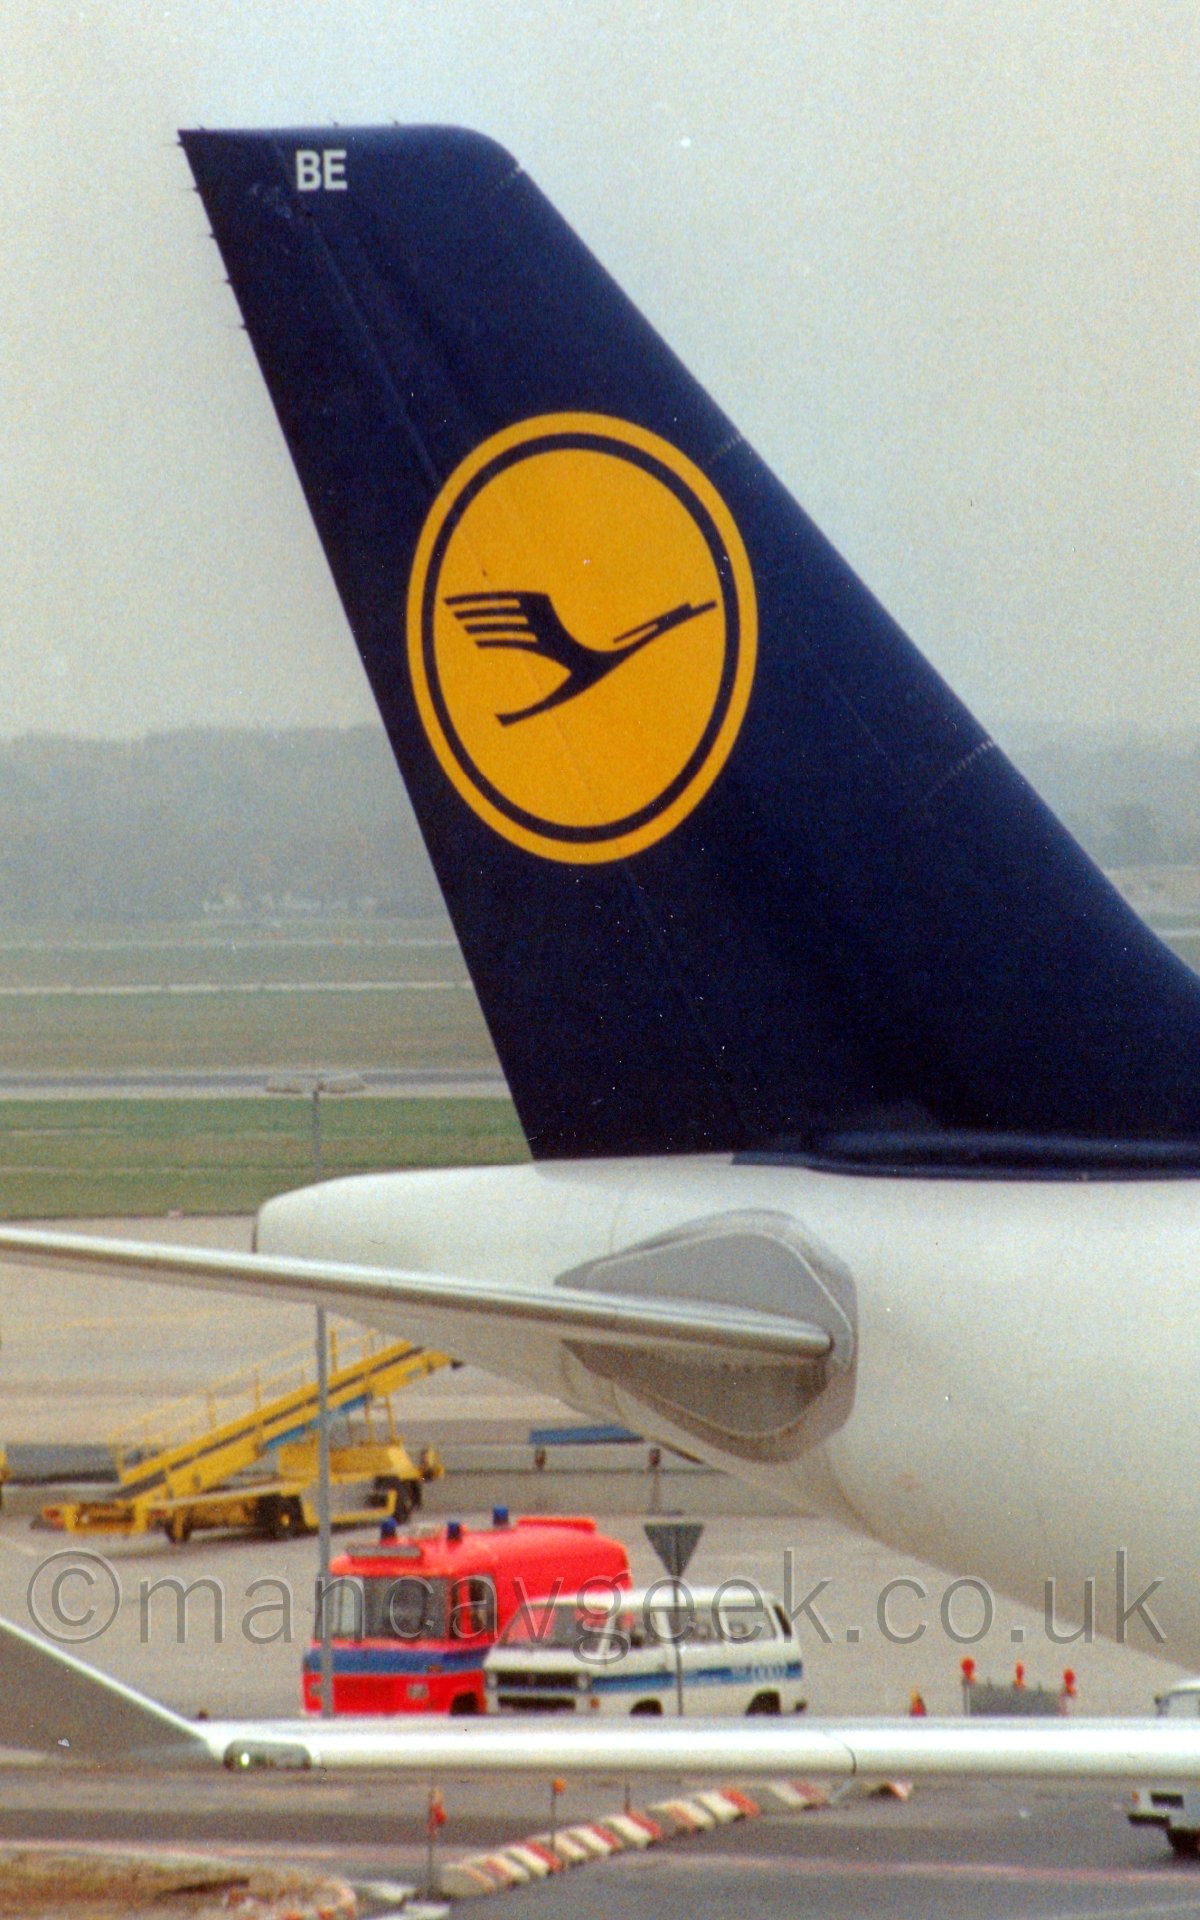 Close up of the white rear fuselage and blue tail of a jet airliner taxiing from left top right, under a misty grey sky.